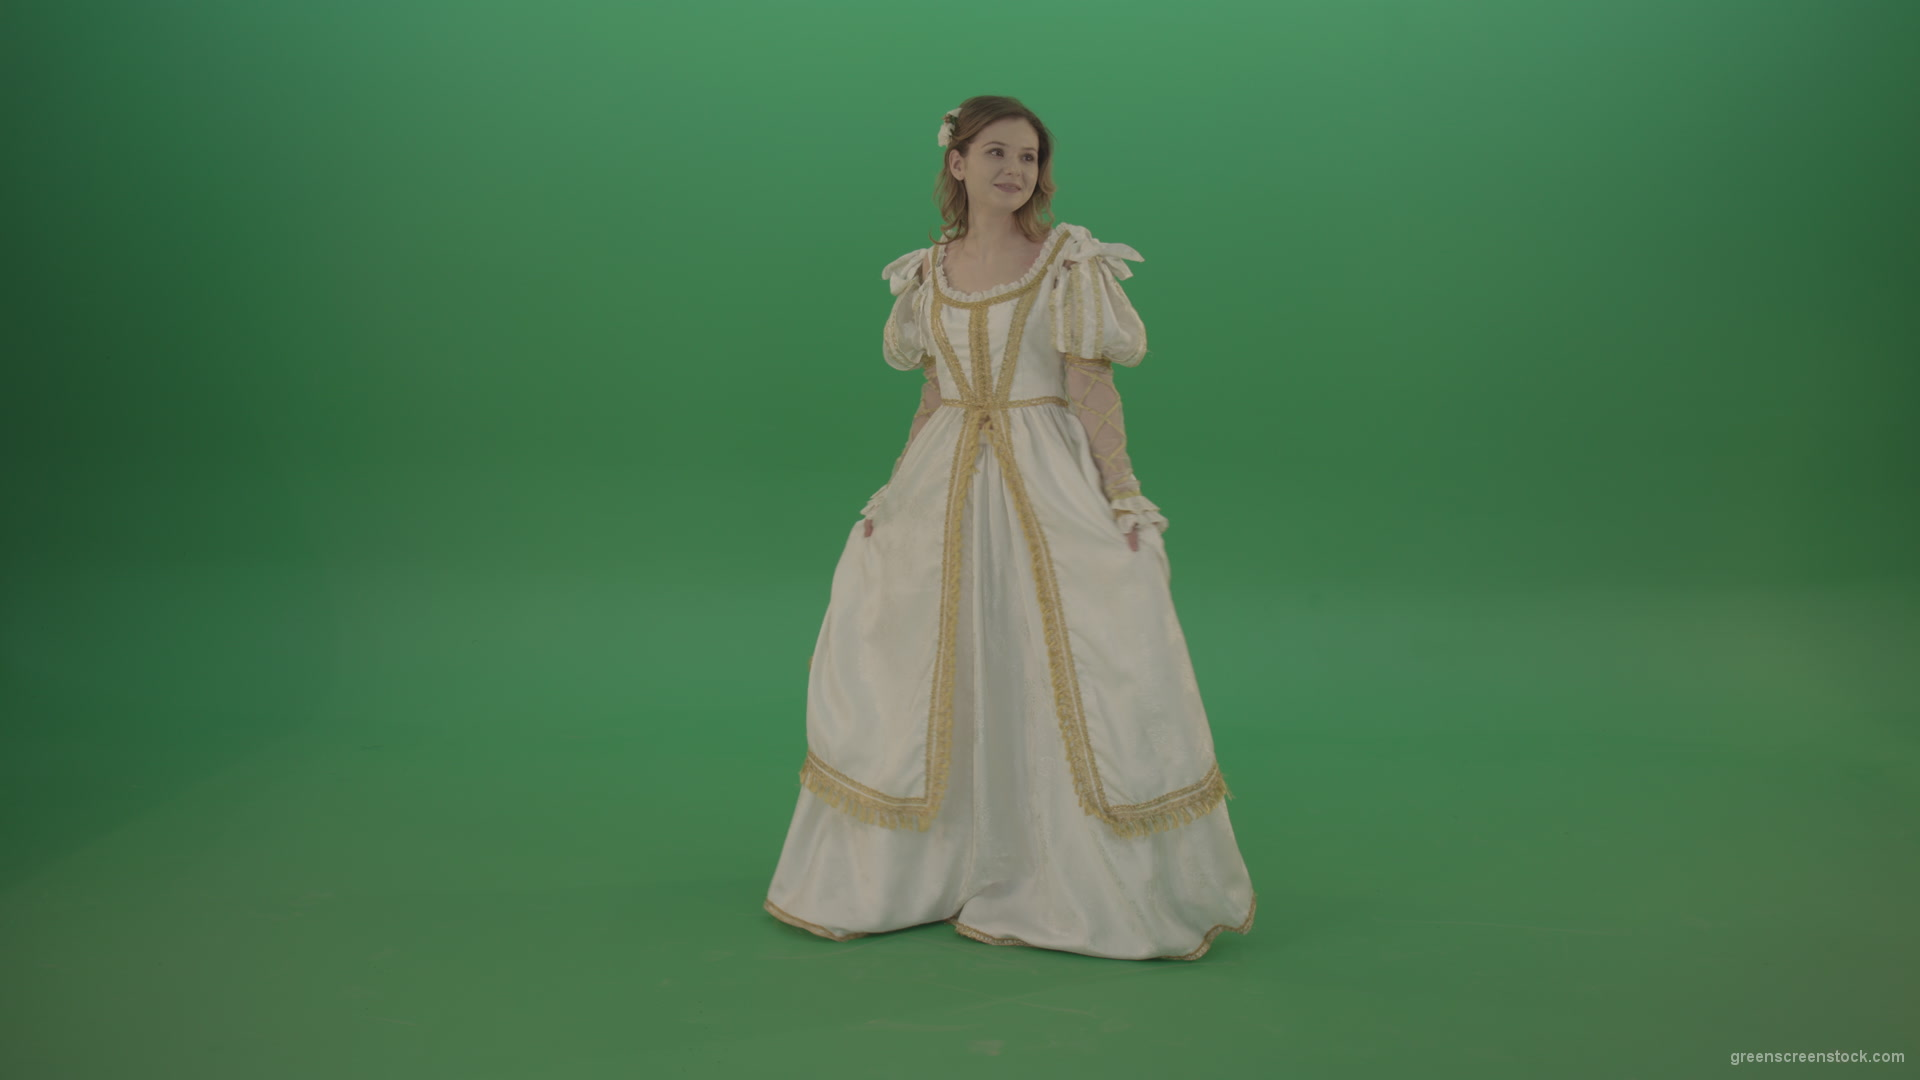 Merry-medieval-girl-dancing-and-rejoicing-isolated-on-green-background_002 Green Screen Stock